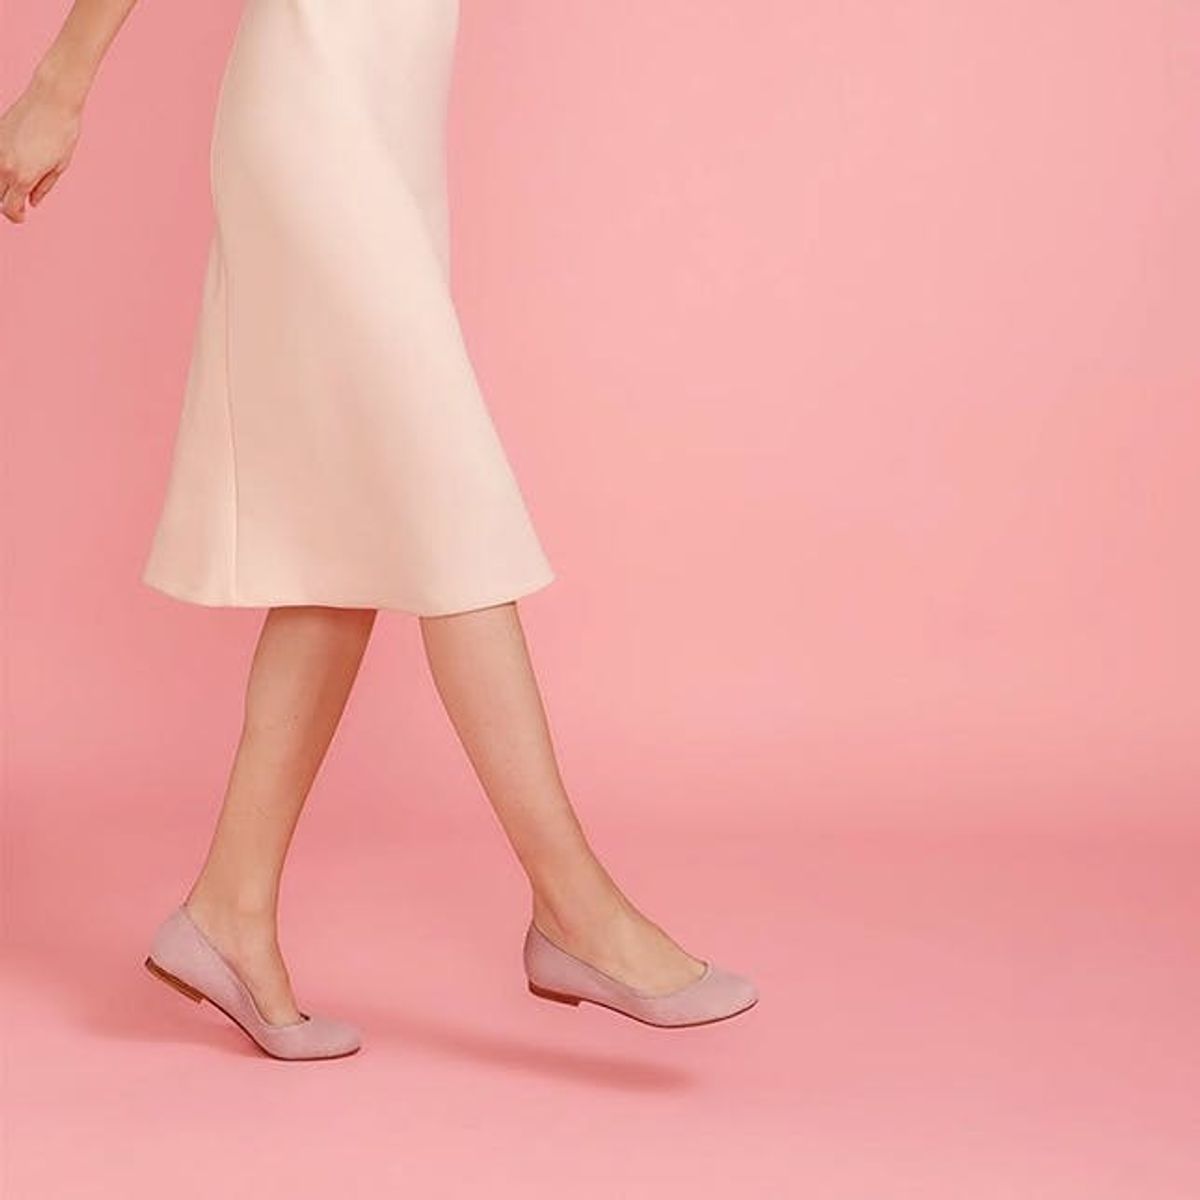 This Innovative Shoe Co Makes Beautiful, Custom Flats That Fit YOU Perfectly